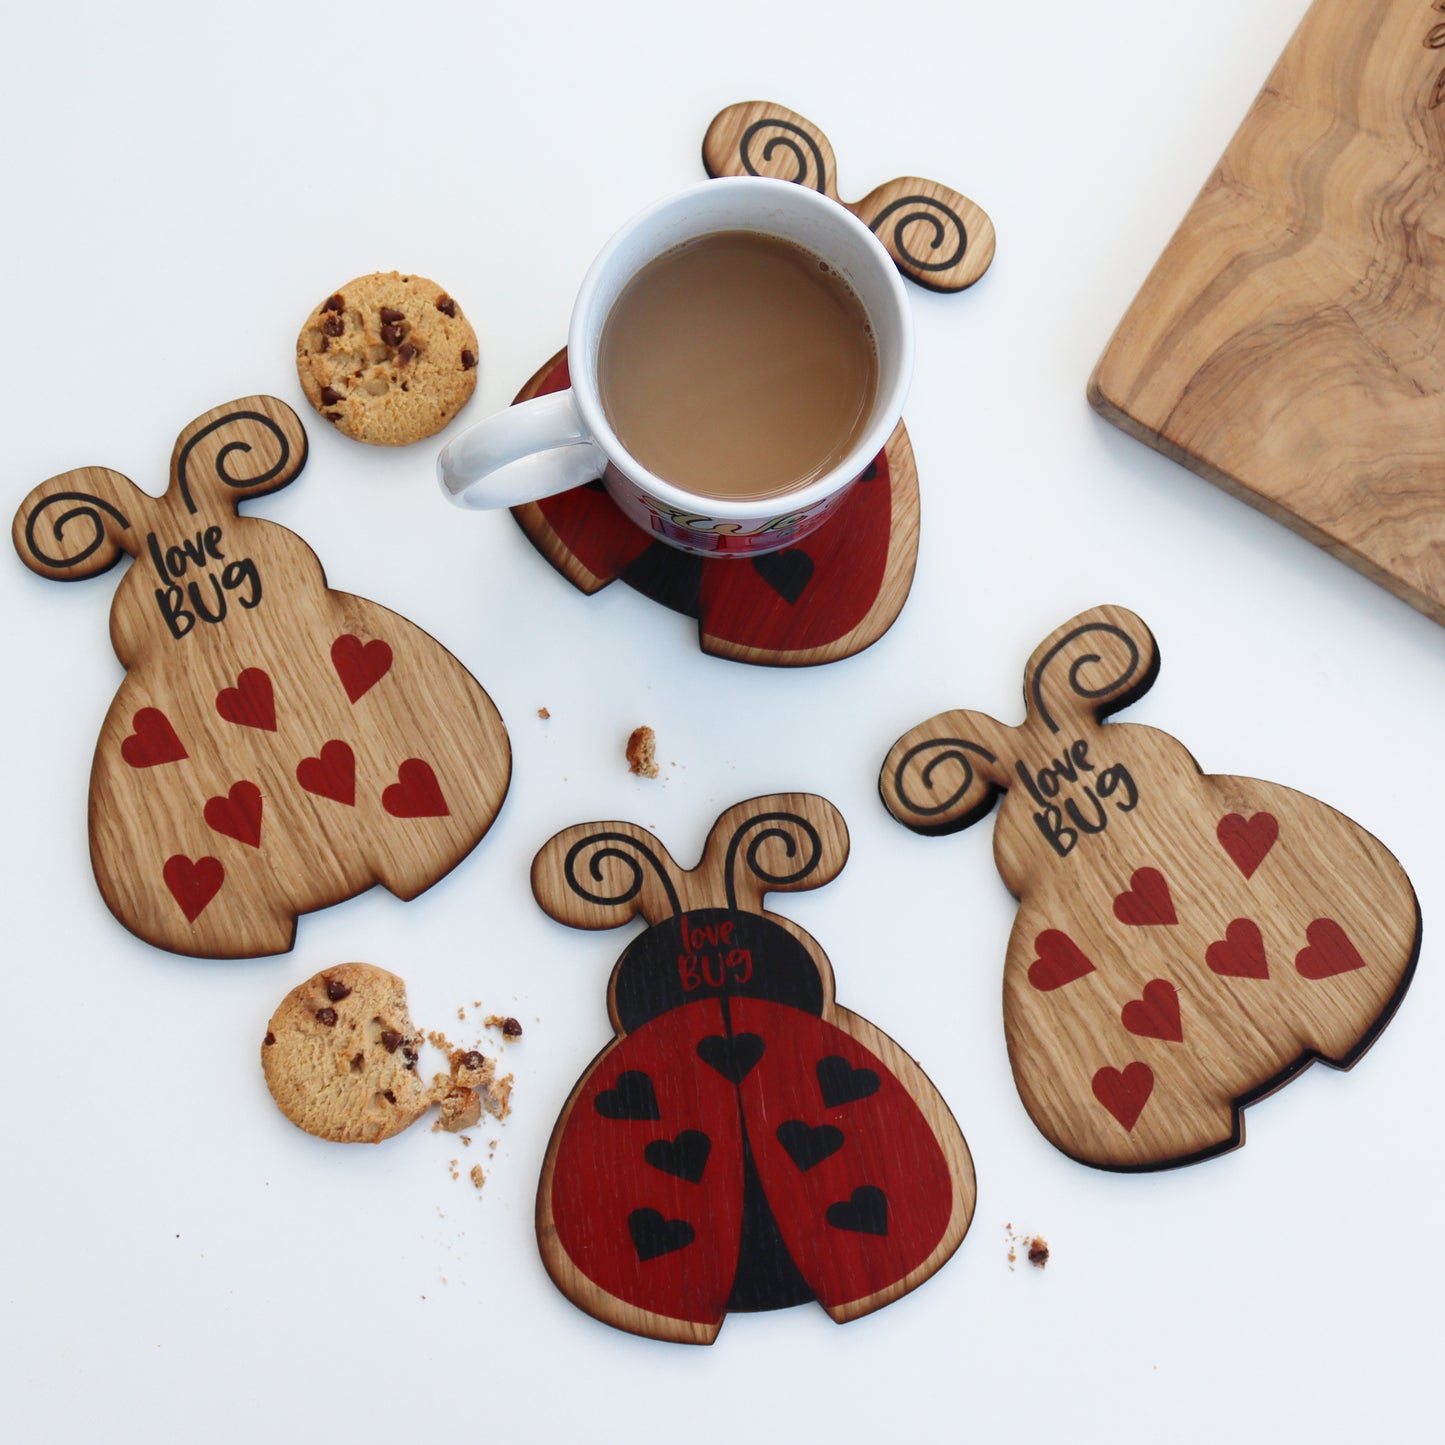 ladybird wooden coasters printed 6mm oak mdf coaster with ladybird and love bug design set of 4